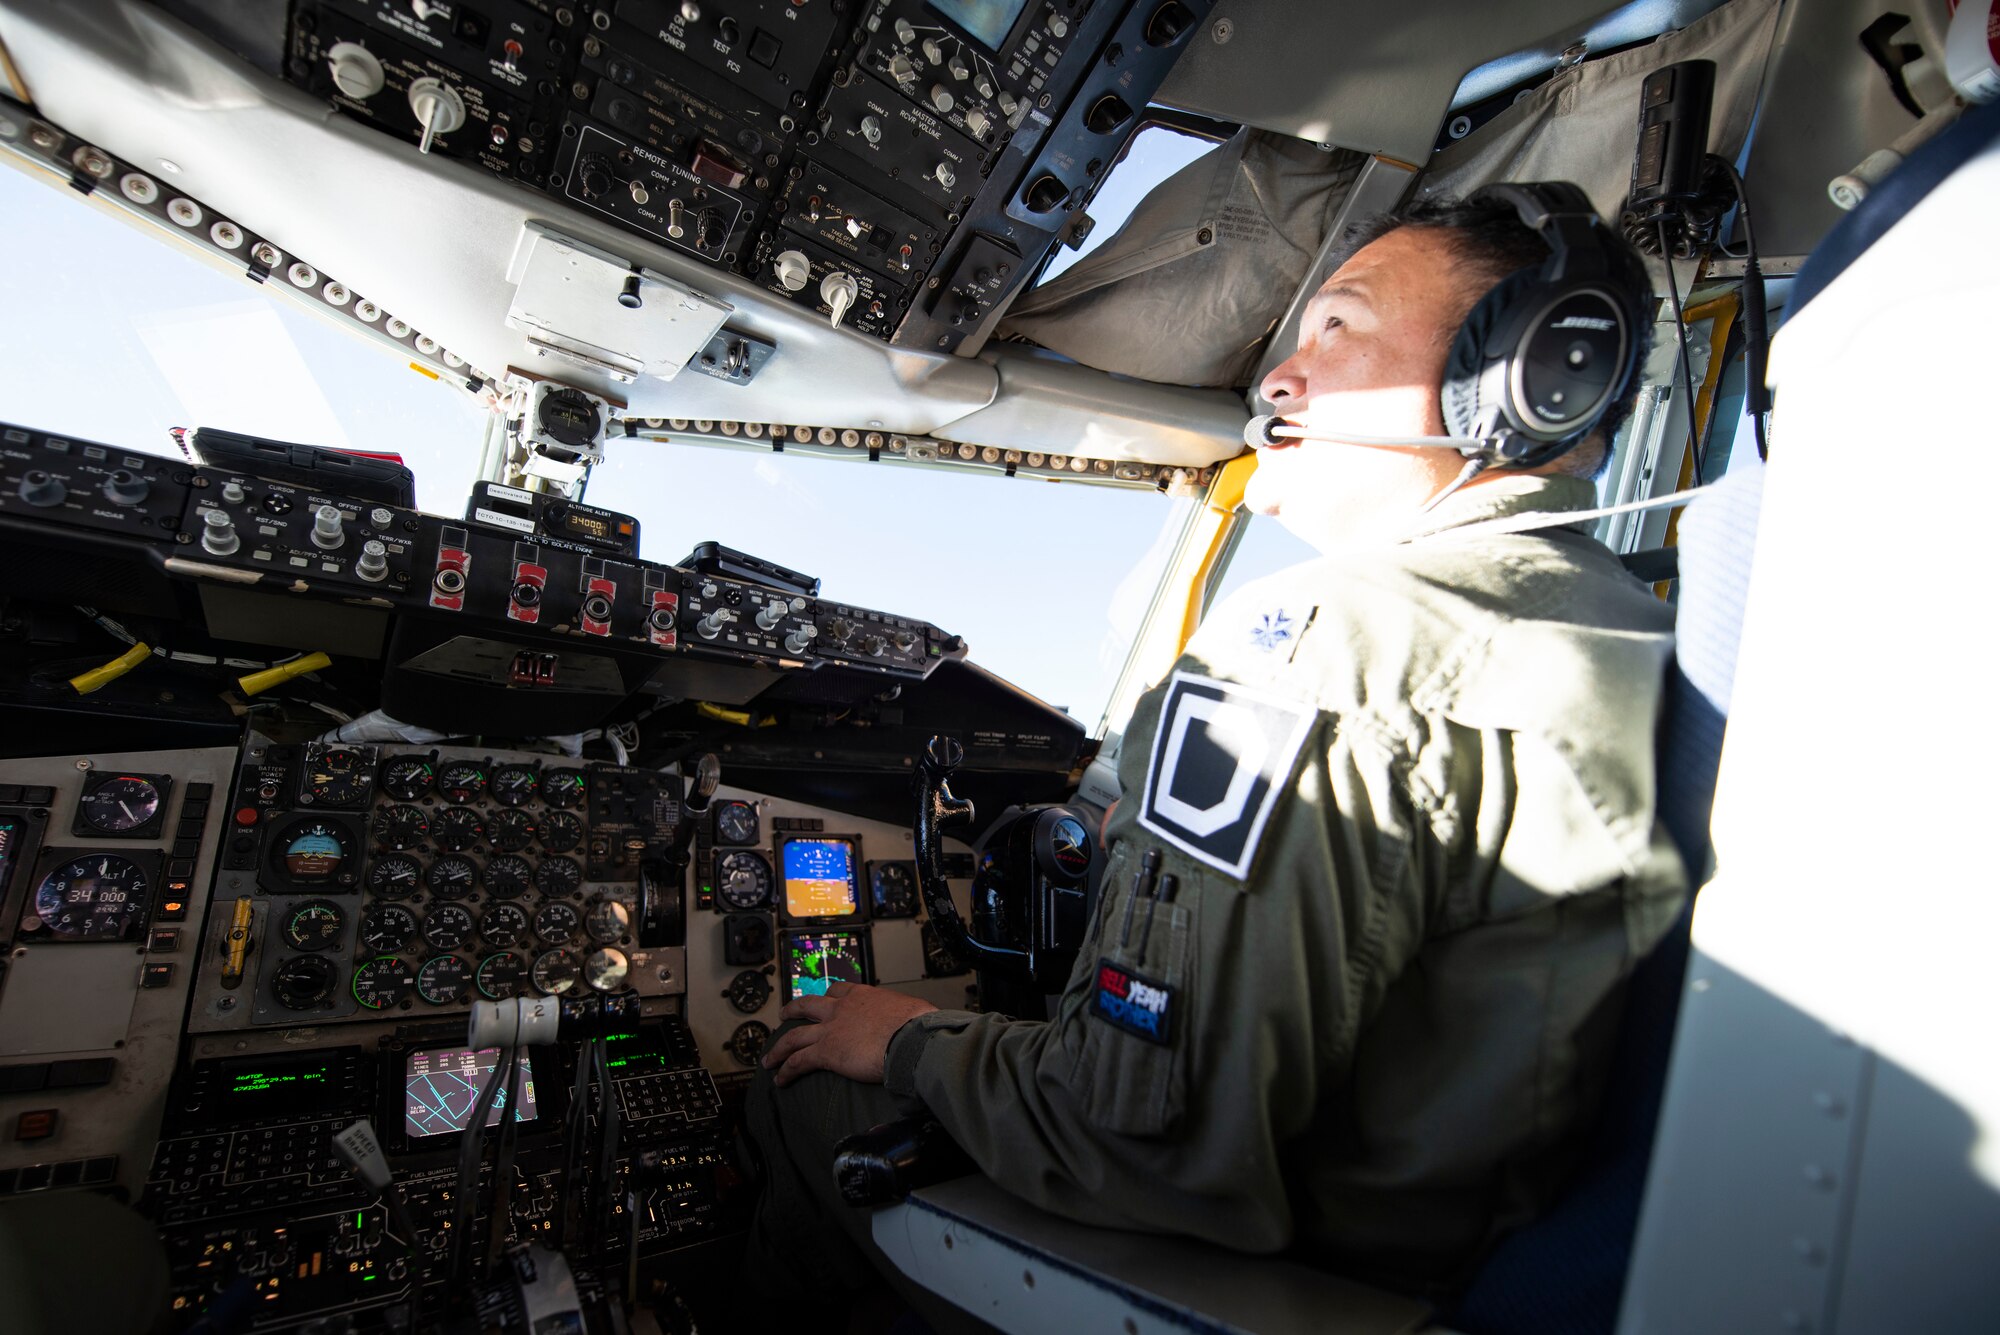 U.S. Air Force Lt. Col. Brian Barba, 351st Air Refueling Squadron director of operation and KC-135 Stratotanker pilot, flies a KC-135 assigned to the 100th Air Refueling Wing, RAF Mildenhall, England, after refueling a B-52H Stratofortress above the Mediterranean Sea in support of a Bomber Task Force Europe mission, Sept. 16, 2020. The B-52s are deployed to RAF Fairford, England, in support of joint and combined training with U.S allies and partners. (U.S. Air Force photo by Senior Airman Jennifer Zima)